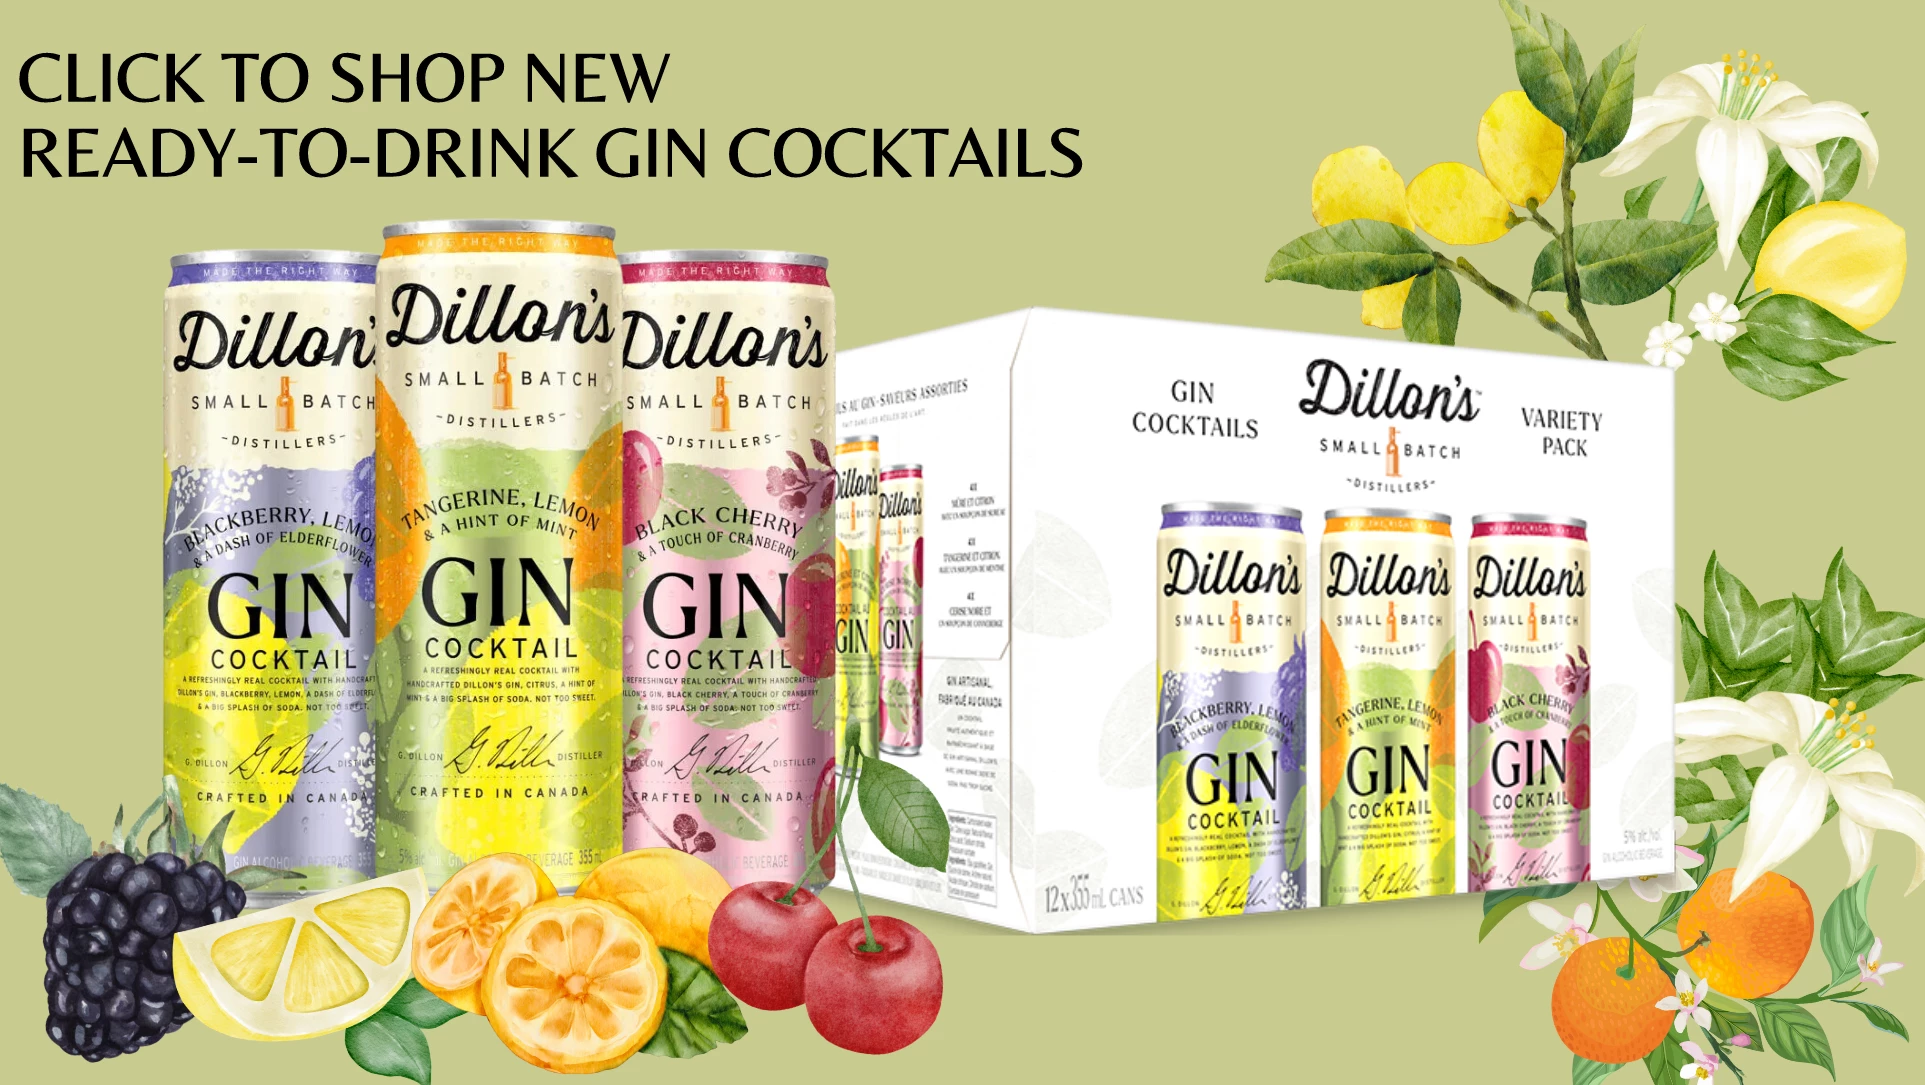 NEW RTD GIN COCKTAILS